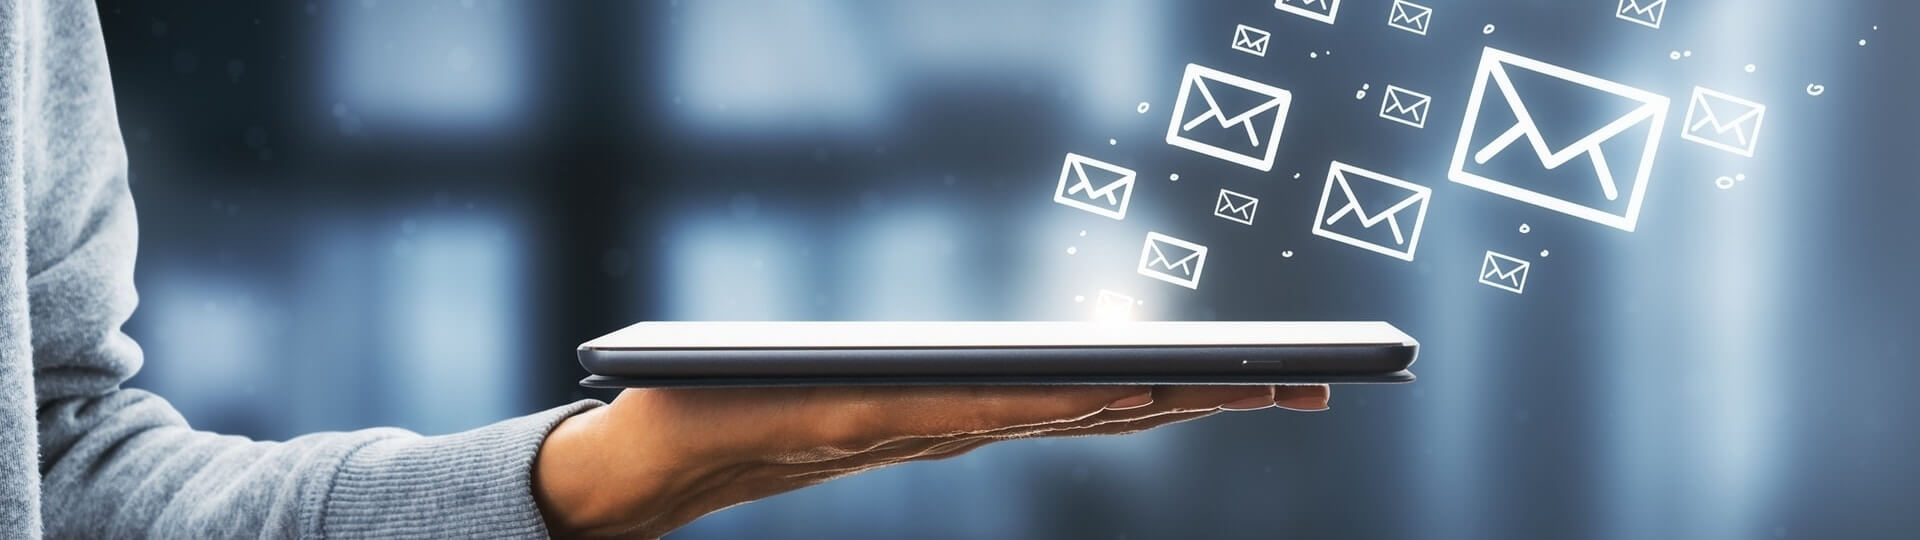 Why Email Marketing Should Be Part of Your 2020 Digital Marketing Plan